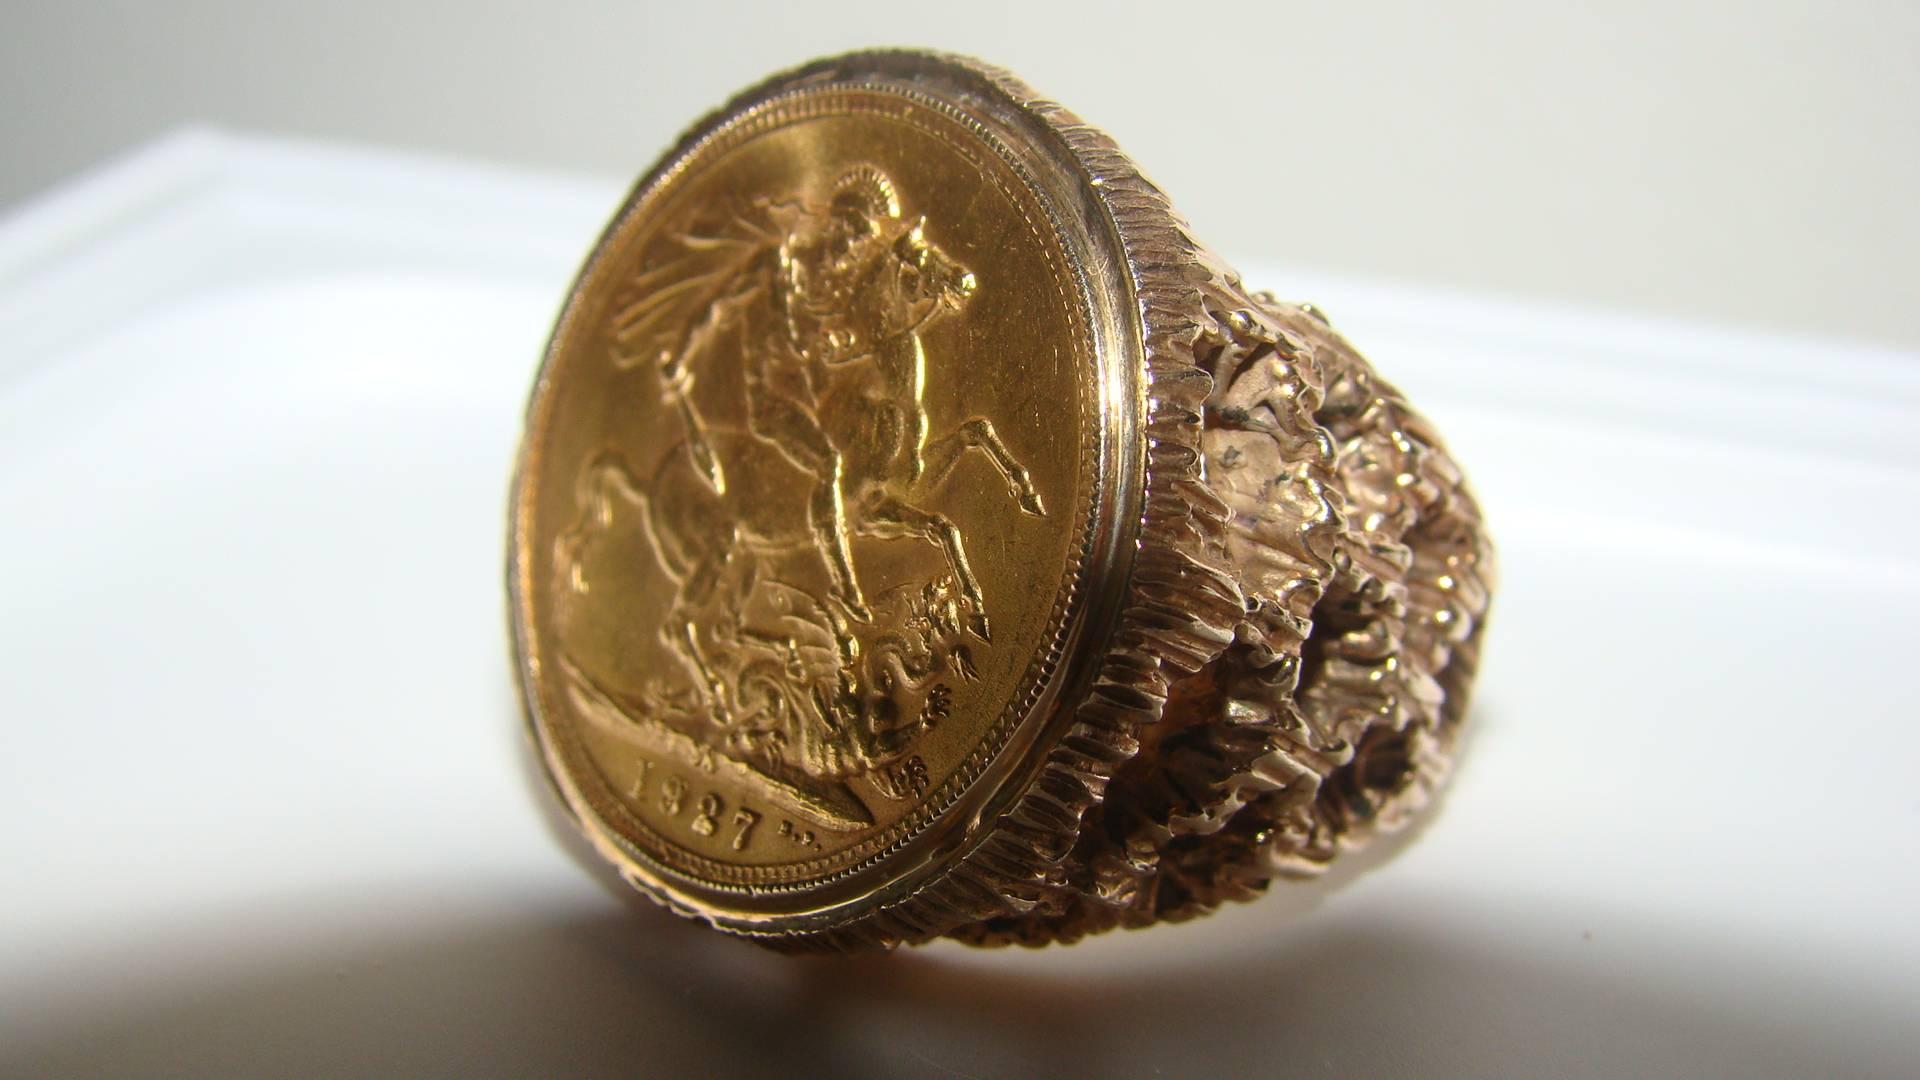 Beautiful 1927 22-karat British full sovereign coin ring. This ring is quite large and heavy comprised of an original 1927 full sovereign 22-karat solid gold coin with 18-karat solid gold sculptural housing. It weighs over 22 grams and appears to be